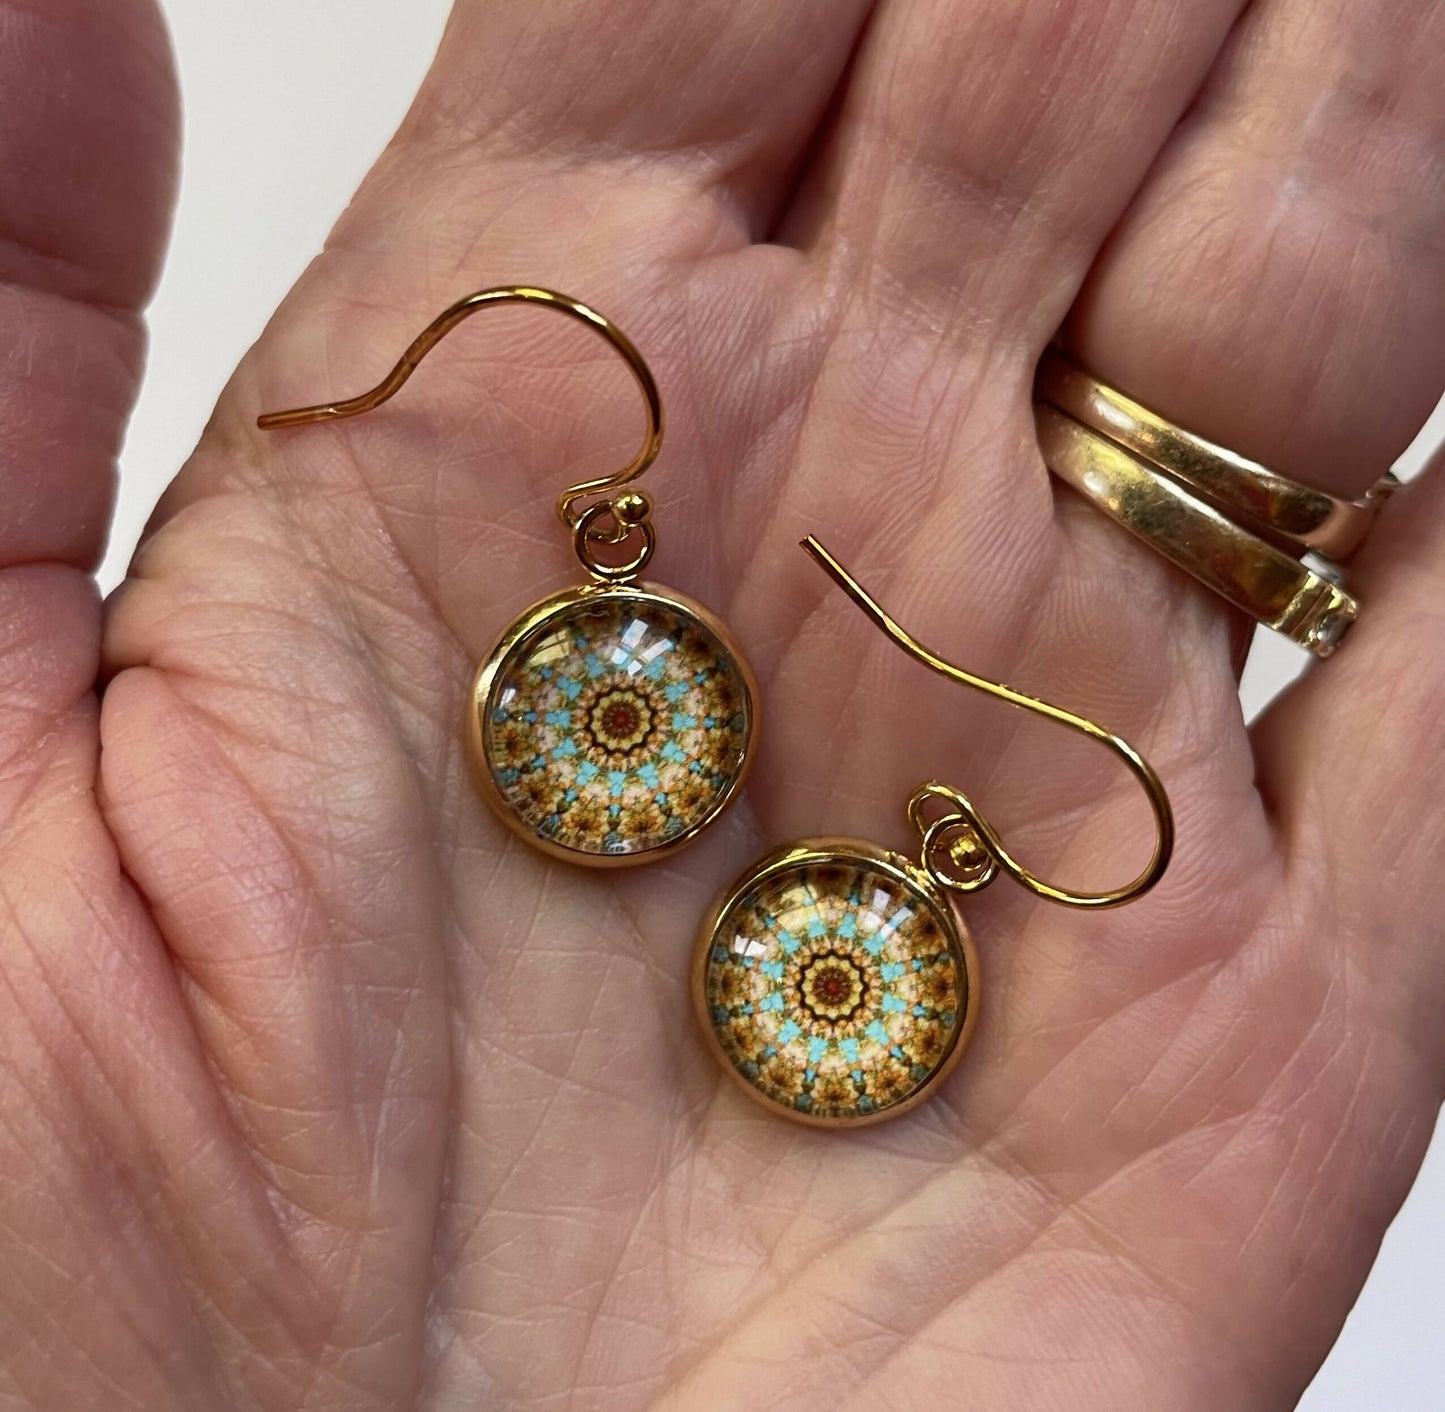 Driehaus Dome French Hook Earrings